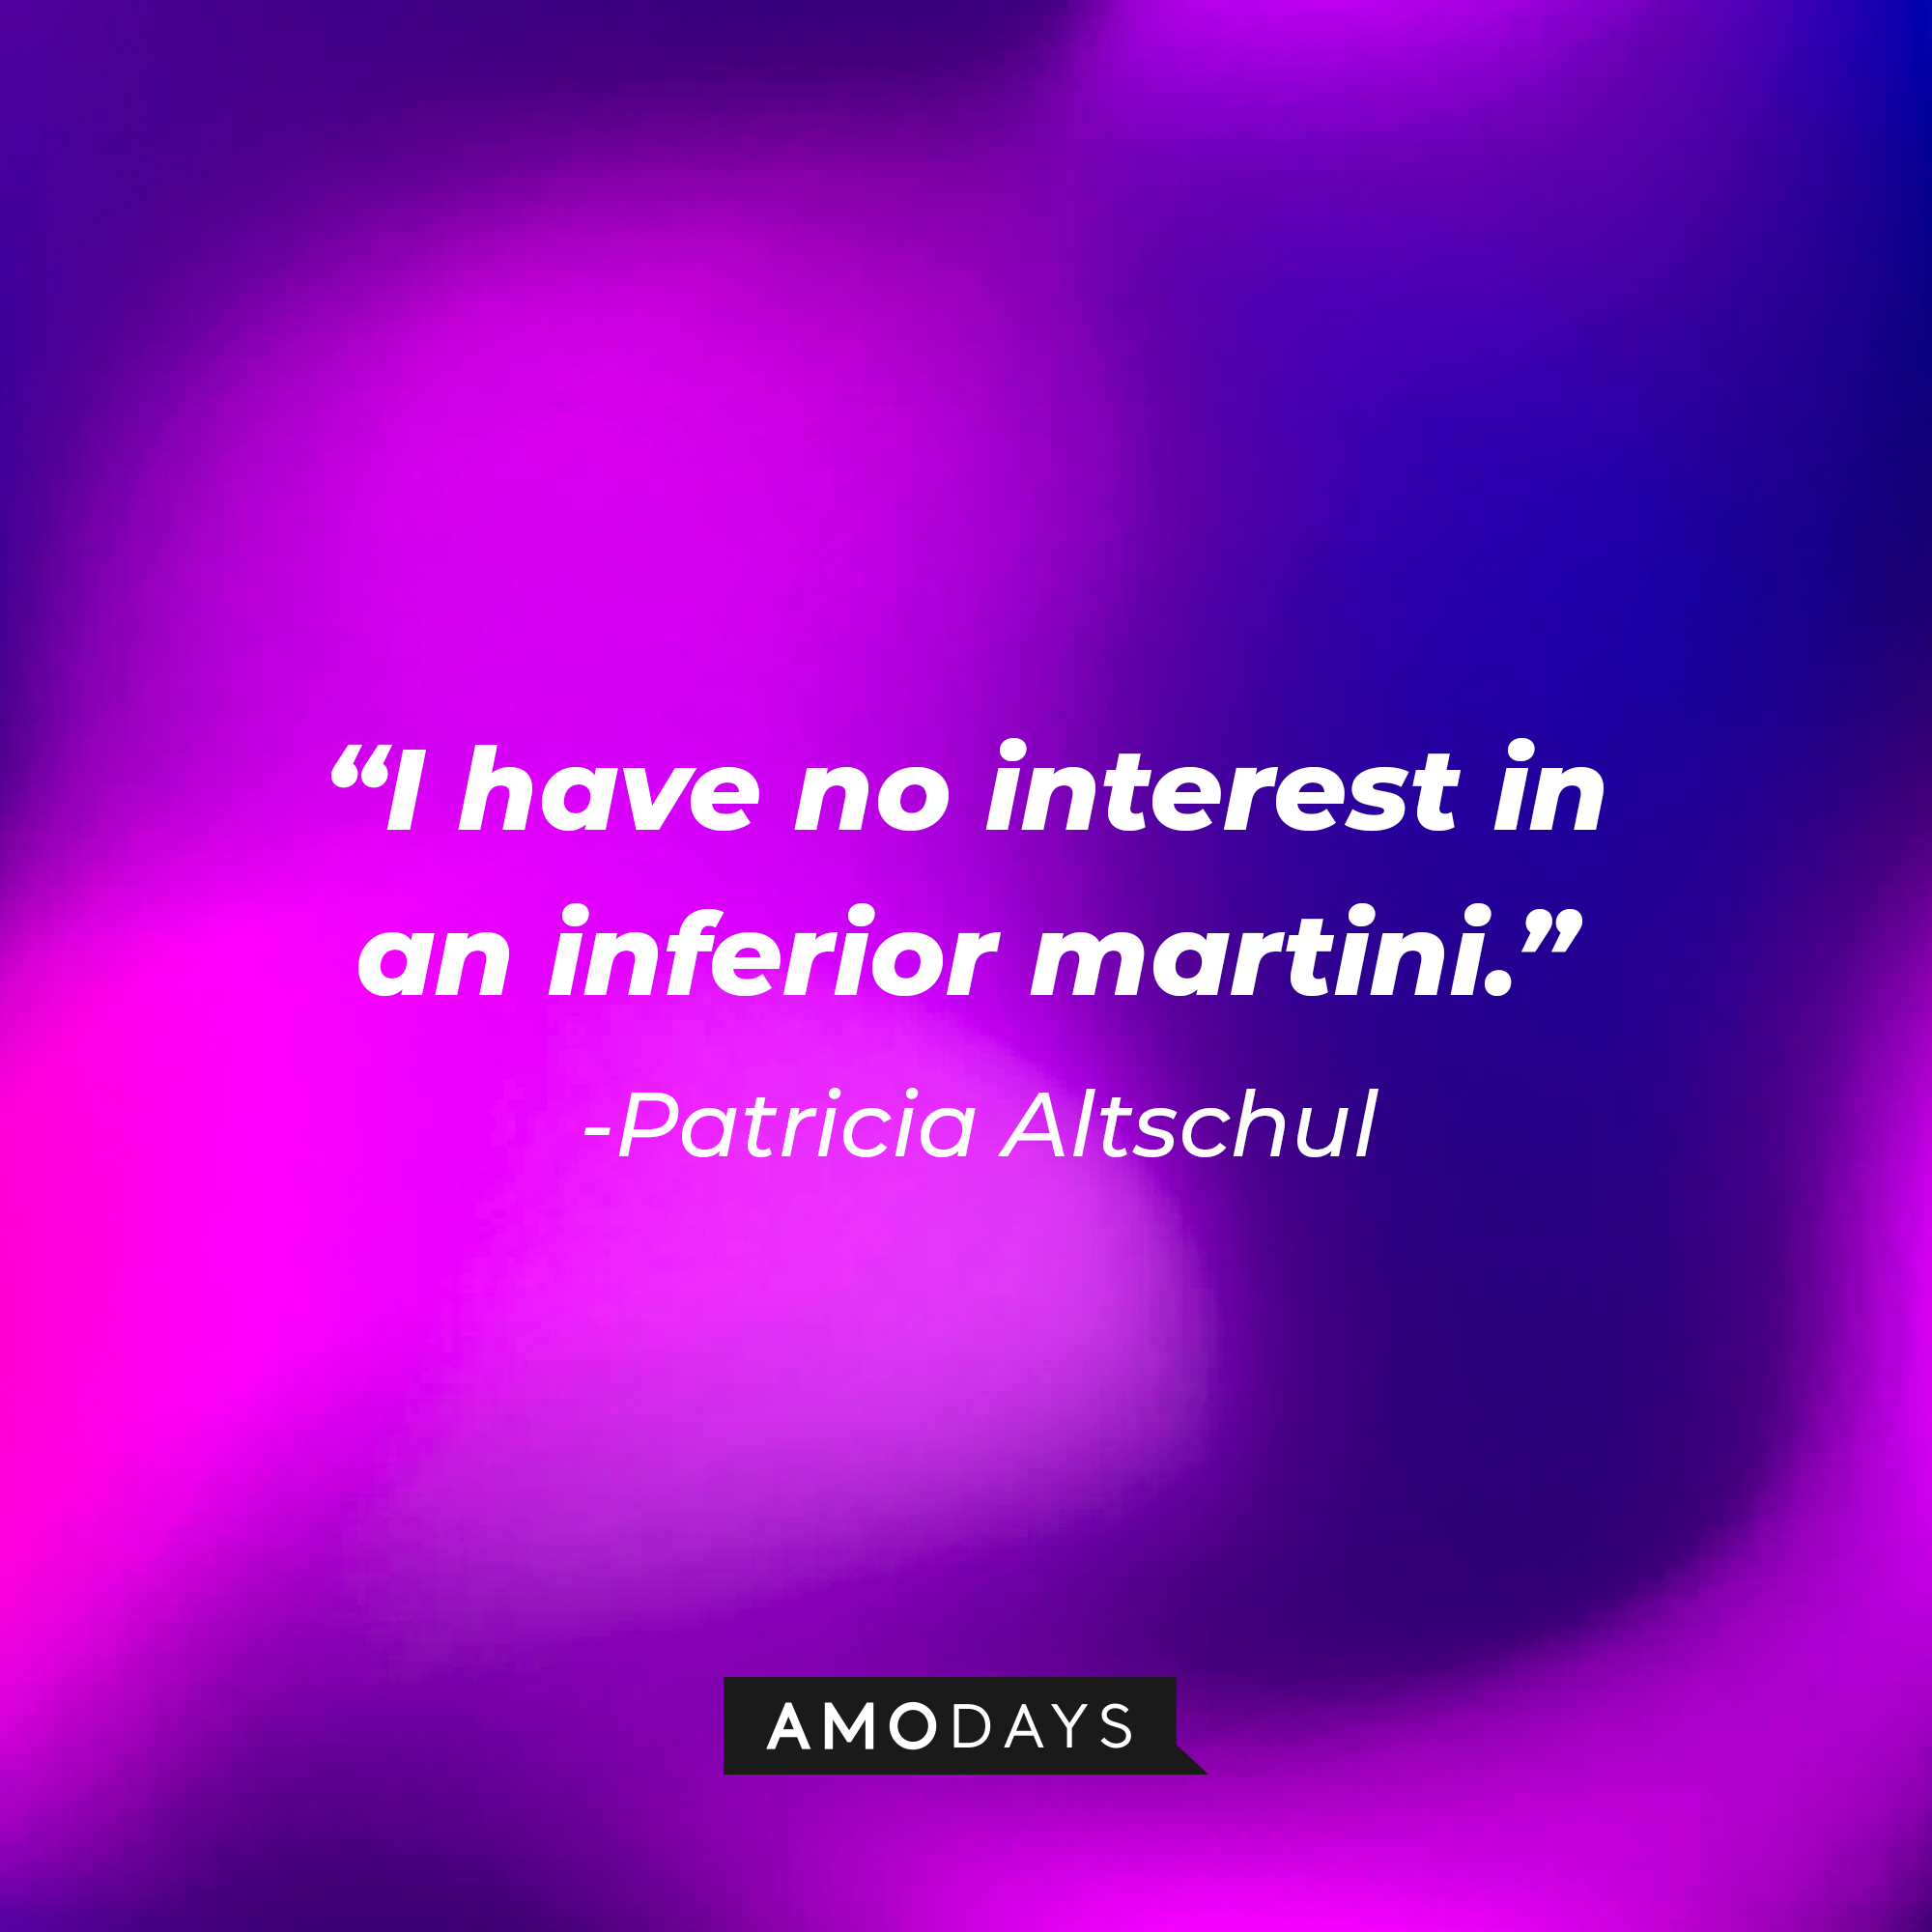 Patricia Altschul's quote: "I have no interest in an inferior martini." | Source: AmoDays